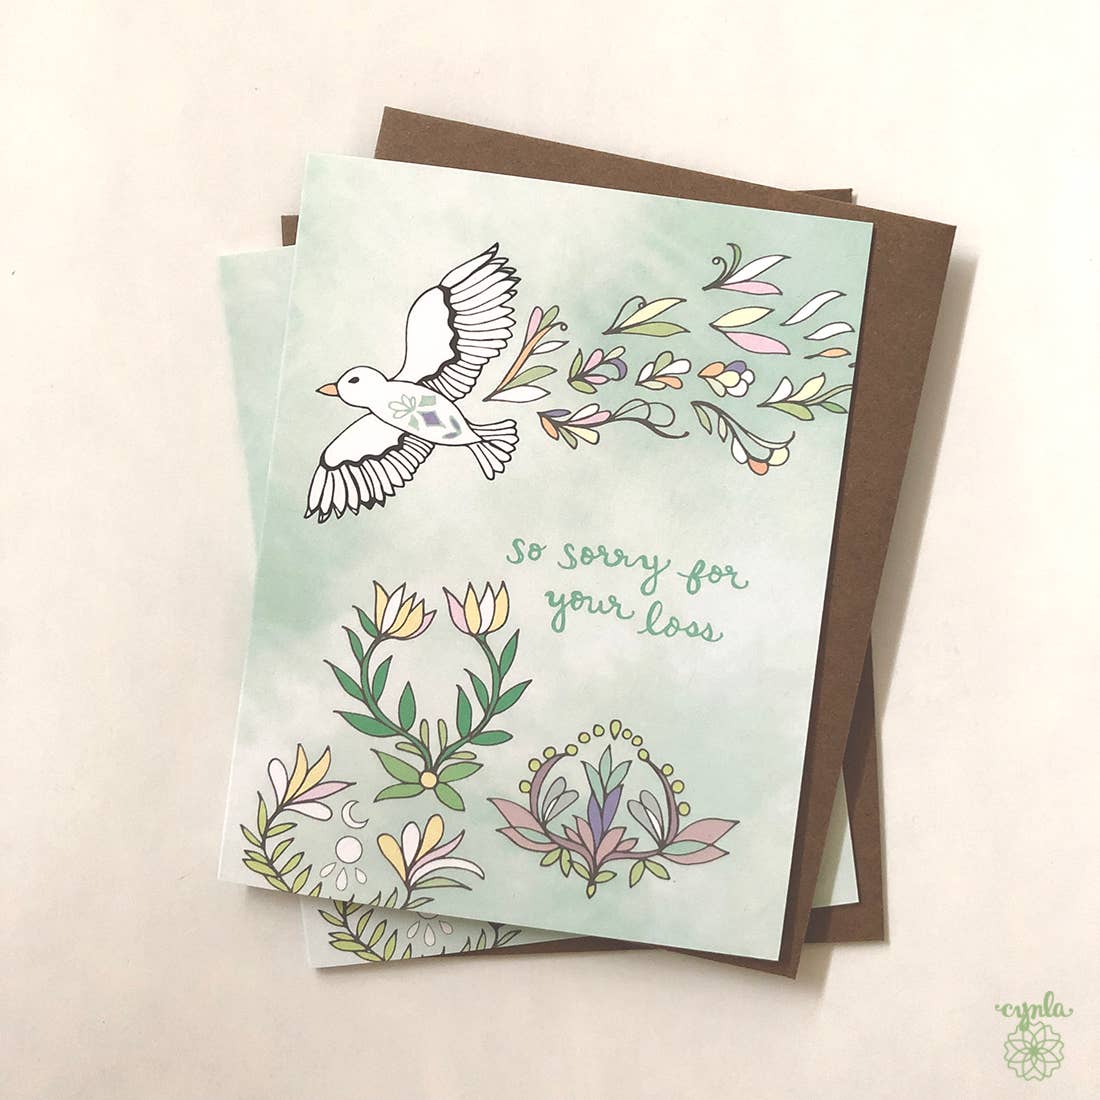 Sympathy card - So sorry for your loss bird - Spiral Circle